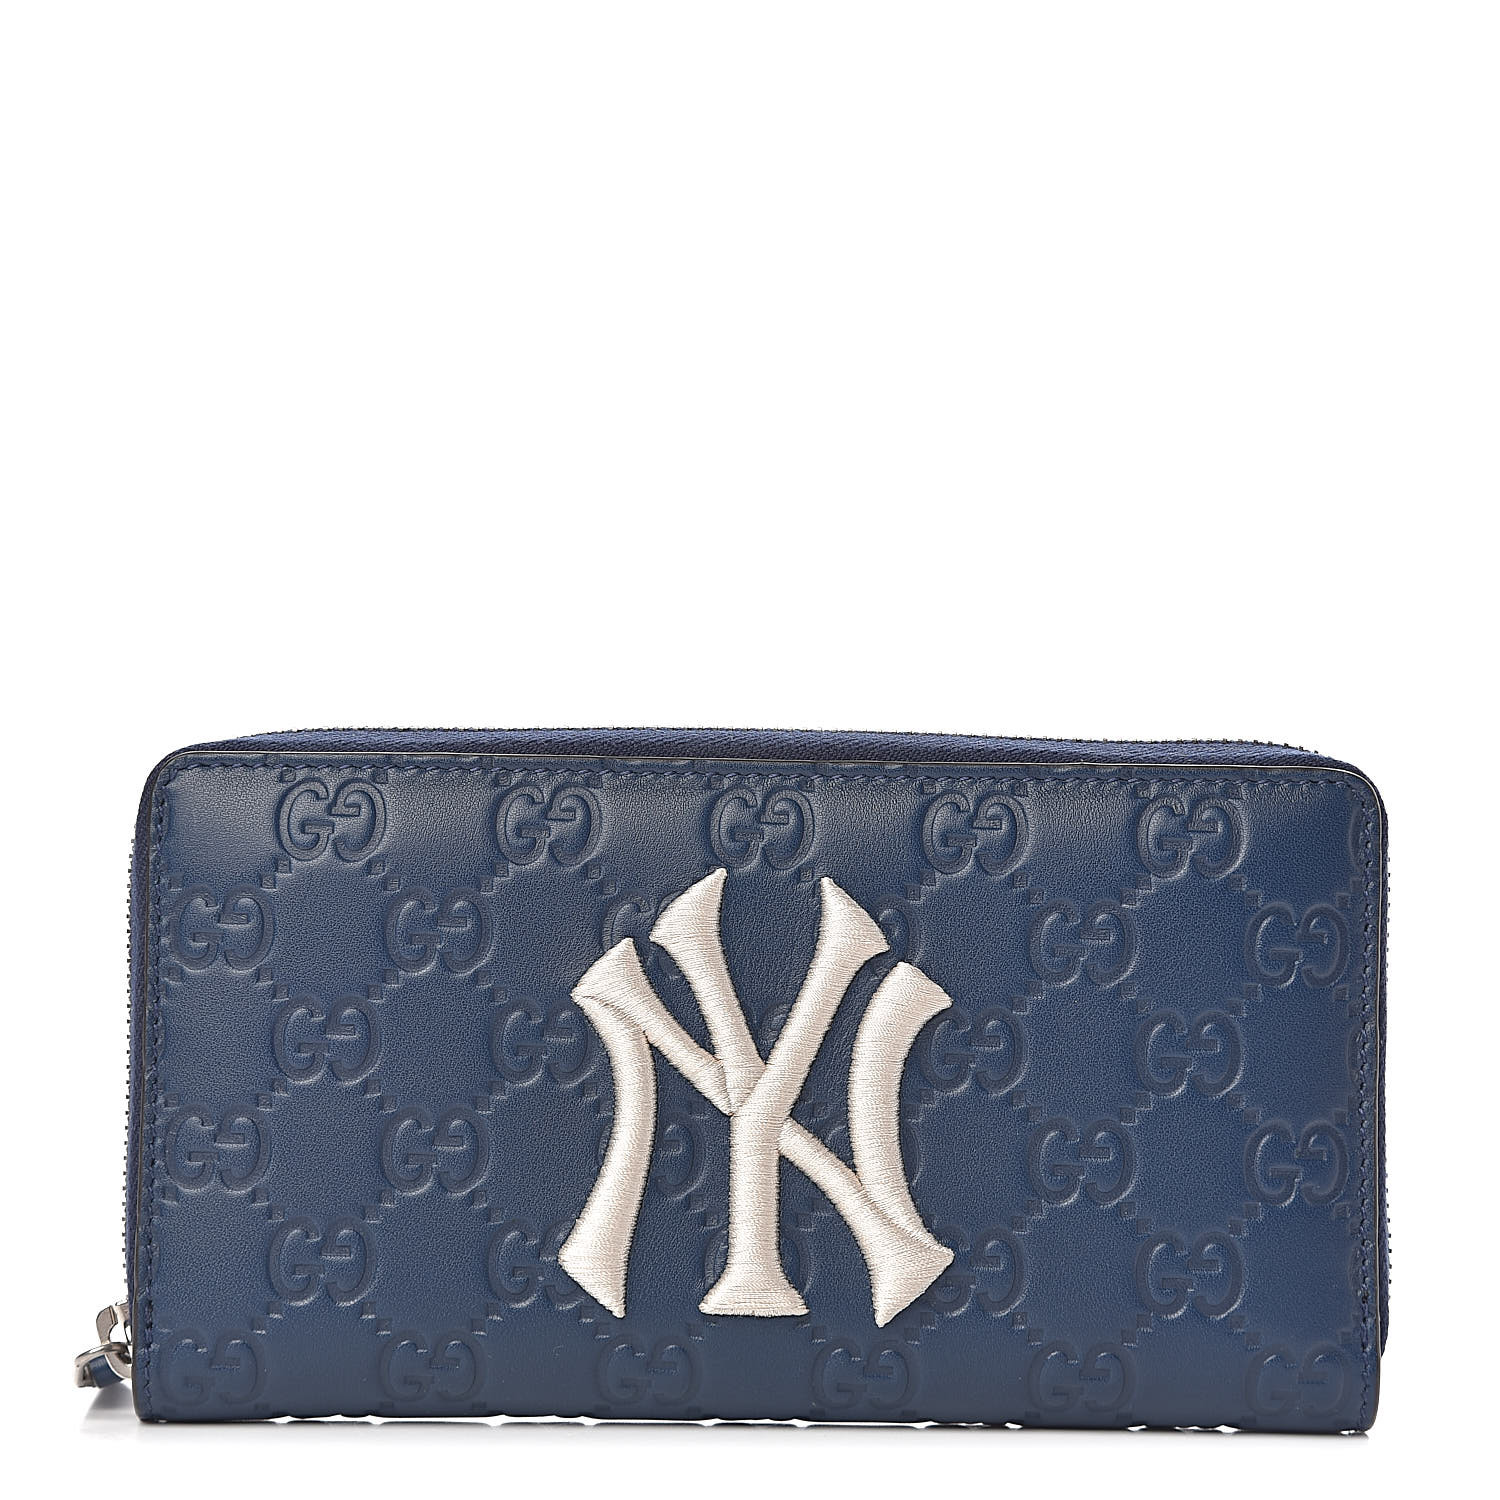 GUCCI Guccissima NY Yankees Zip Around Wallet Blue 486288